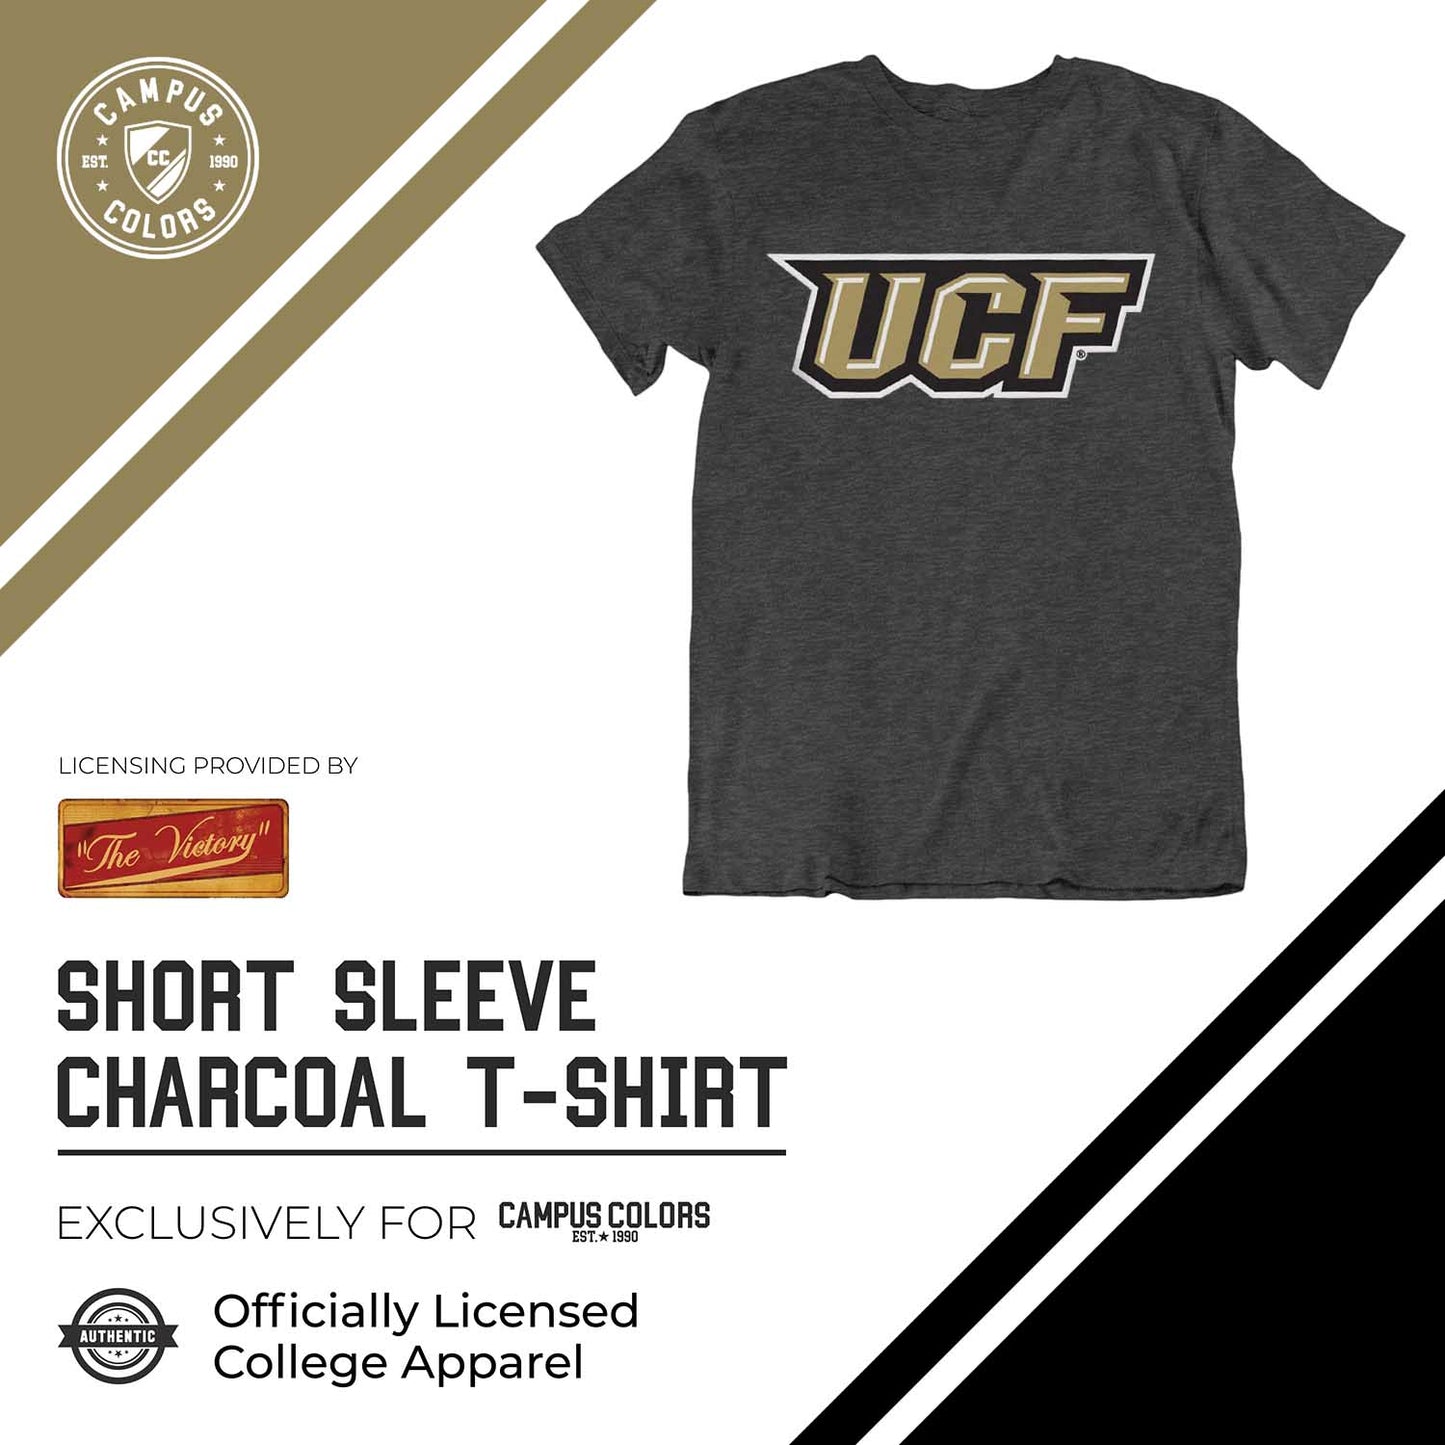 Central Florida Knights Campus Colors NCAA Adult Cotton Blend Charcoal Tagless T-Shirt - Charcoal